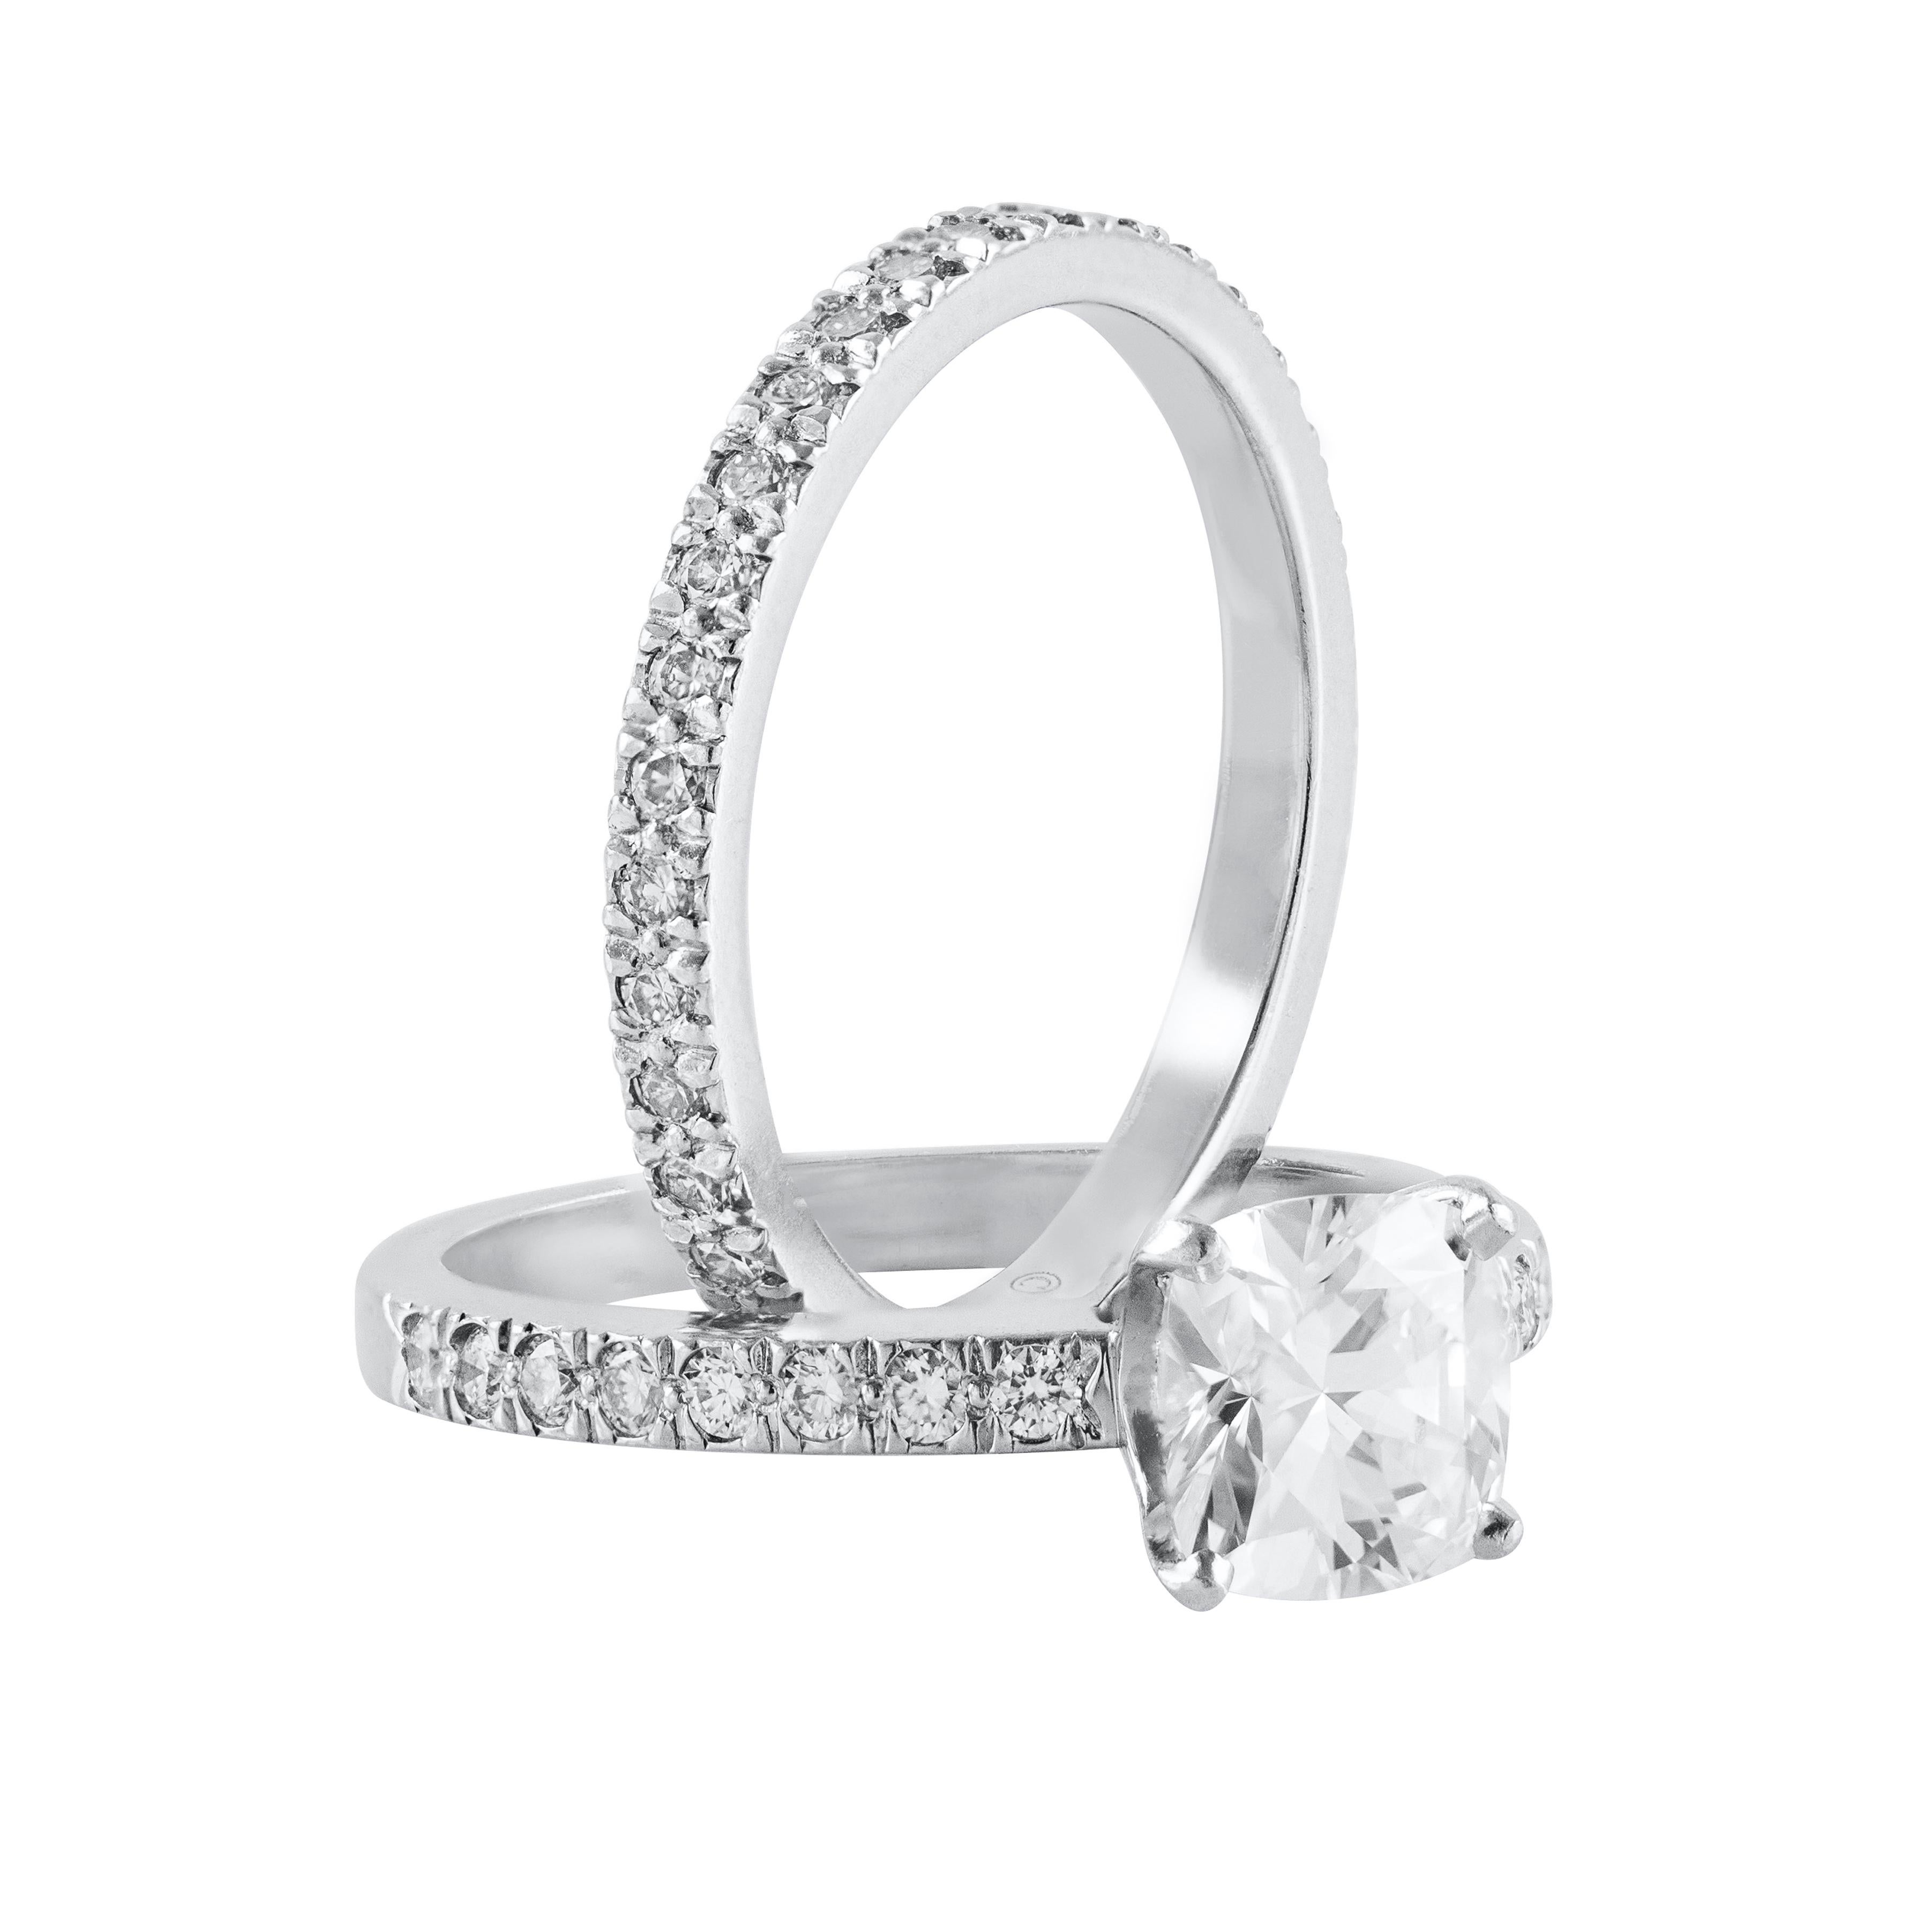 Women's Tiffany & Co. 1.01 Cushion Cut Diamond Engagement Ring and Wedding Band Ring Set For Sale